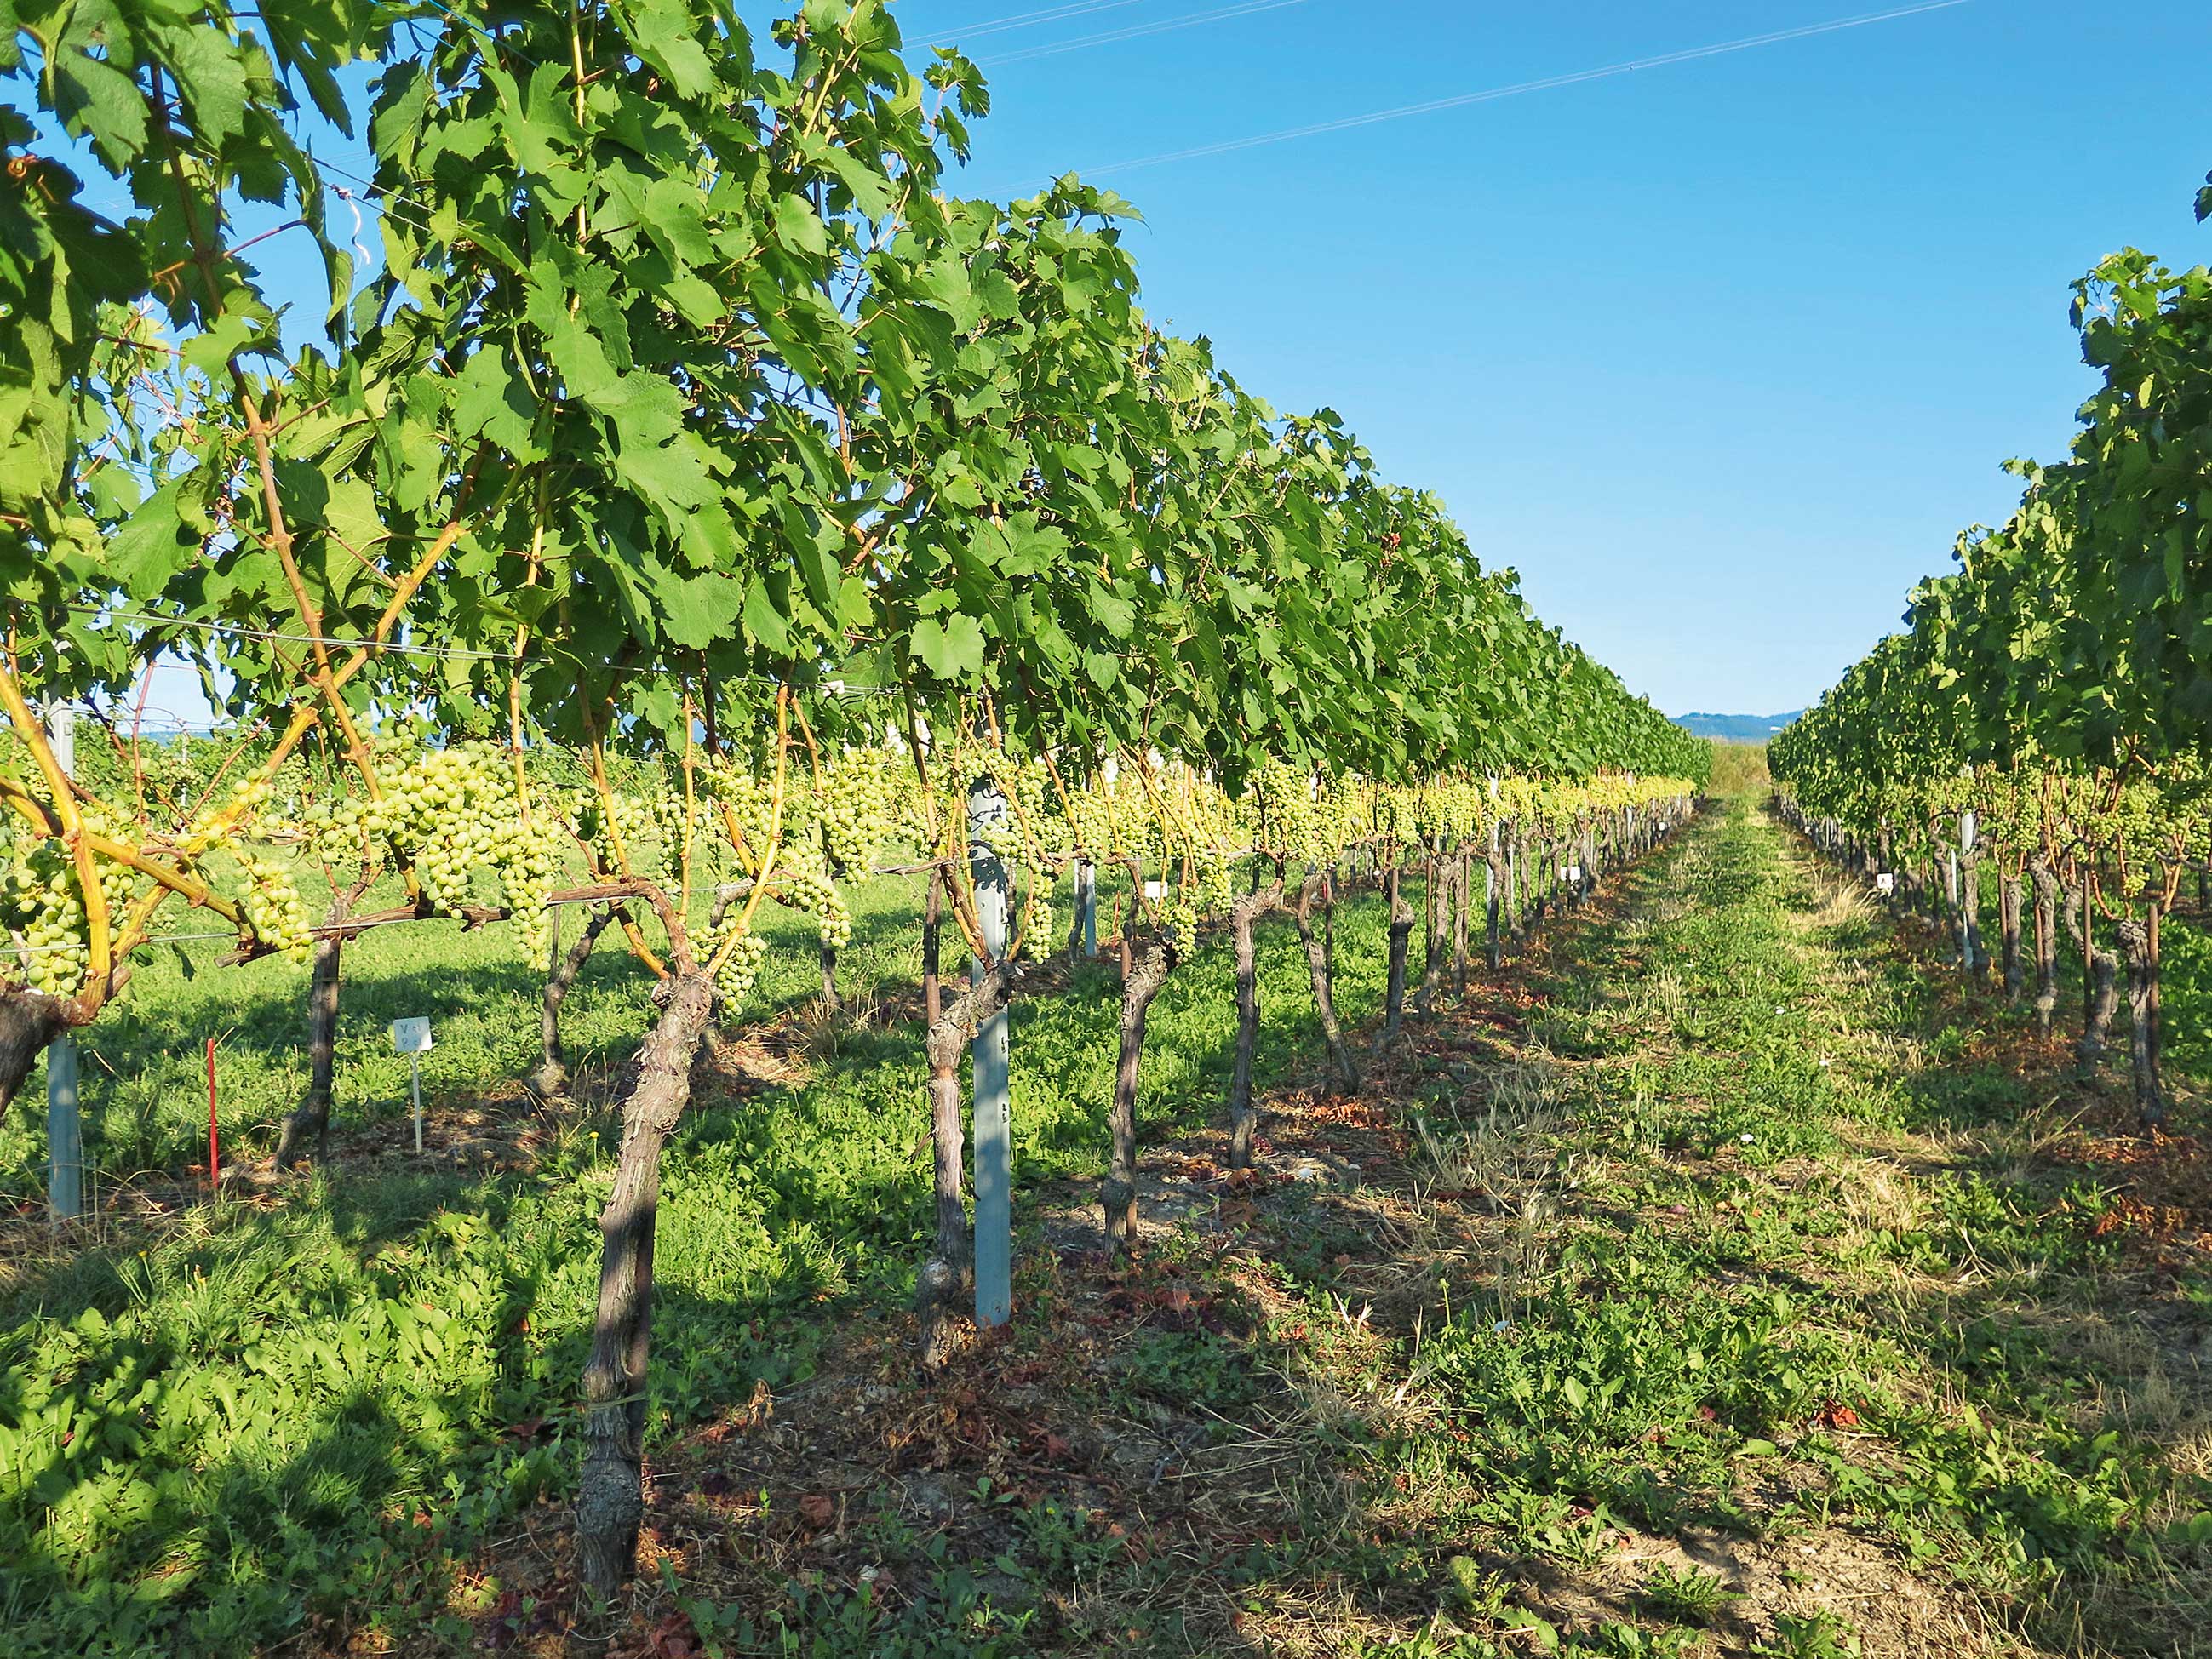 Pros and cons of early defoliation of the white cv. Vitis vinifera Doral in the Leman region (Switzerland)